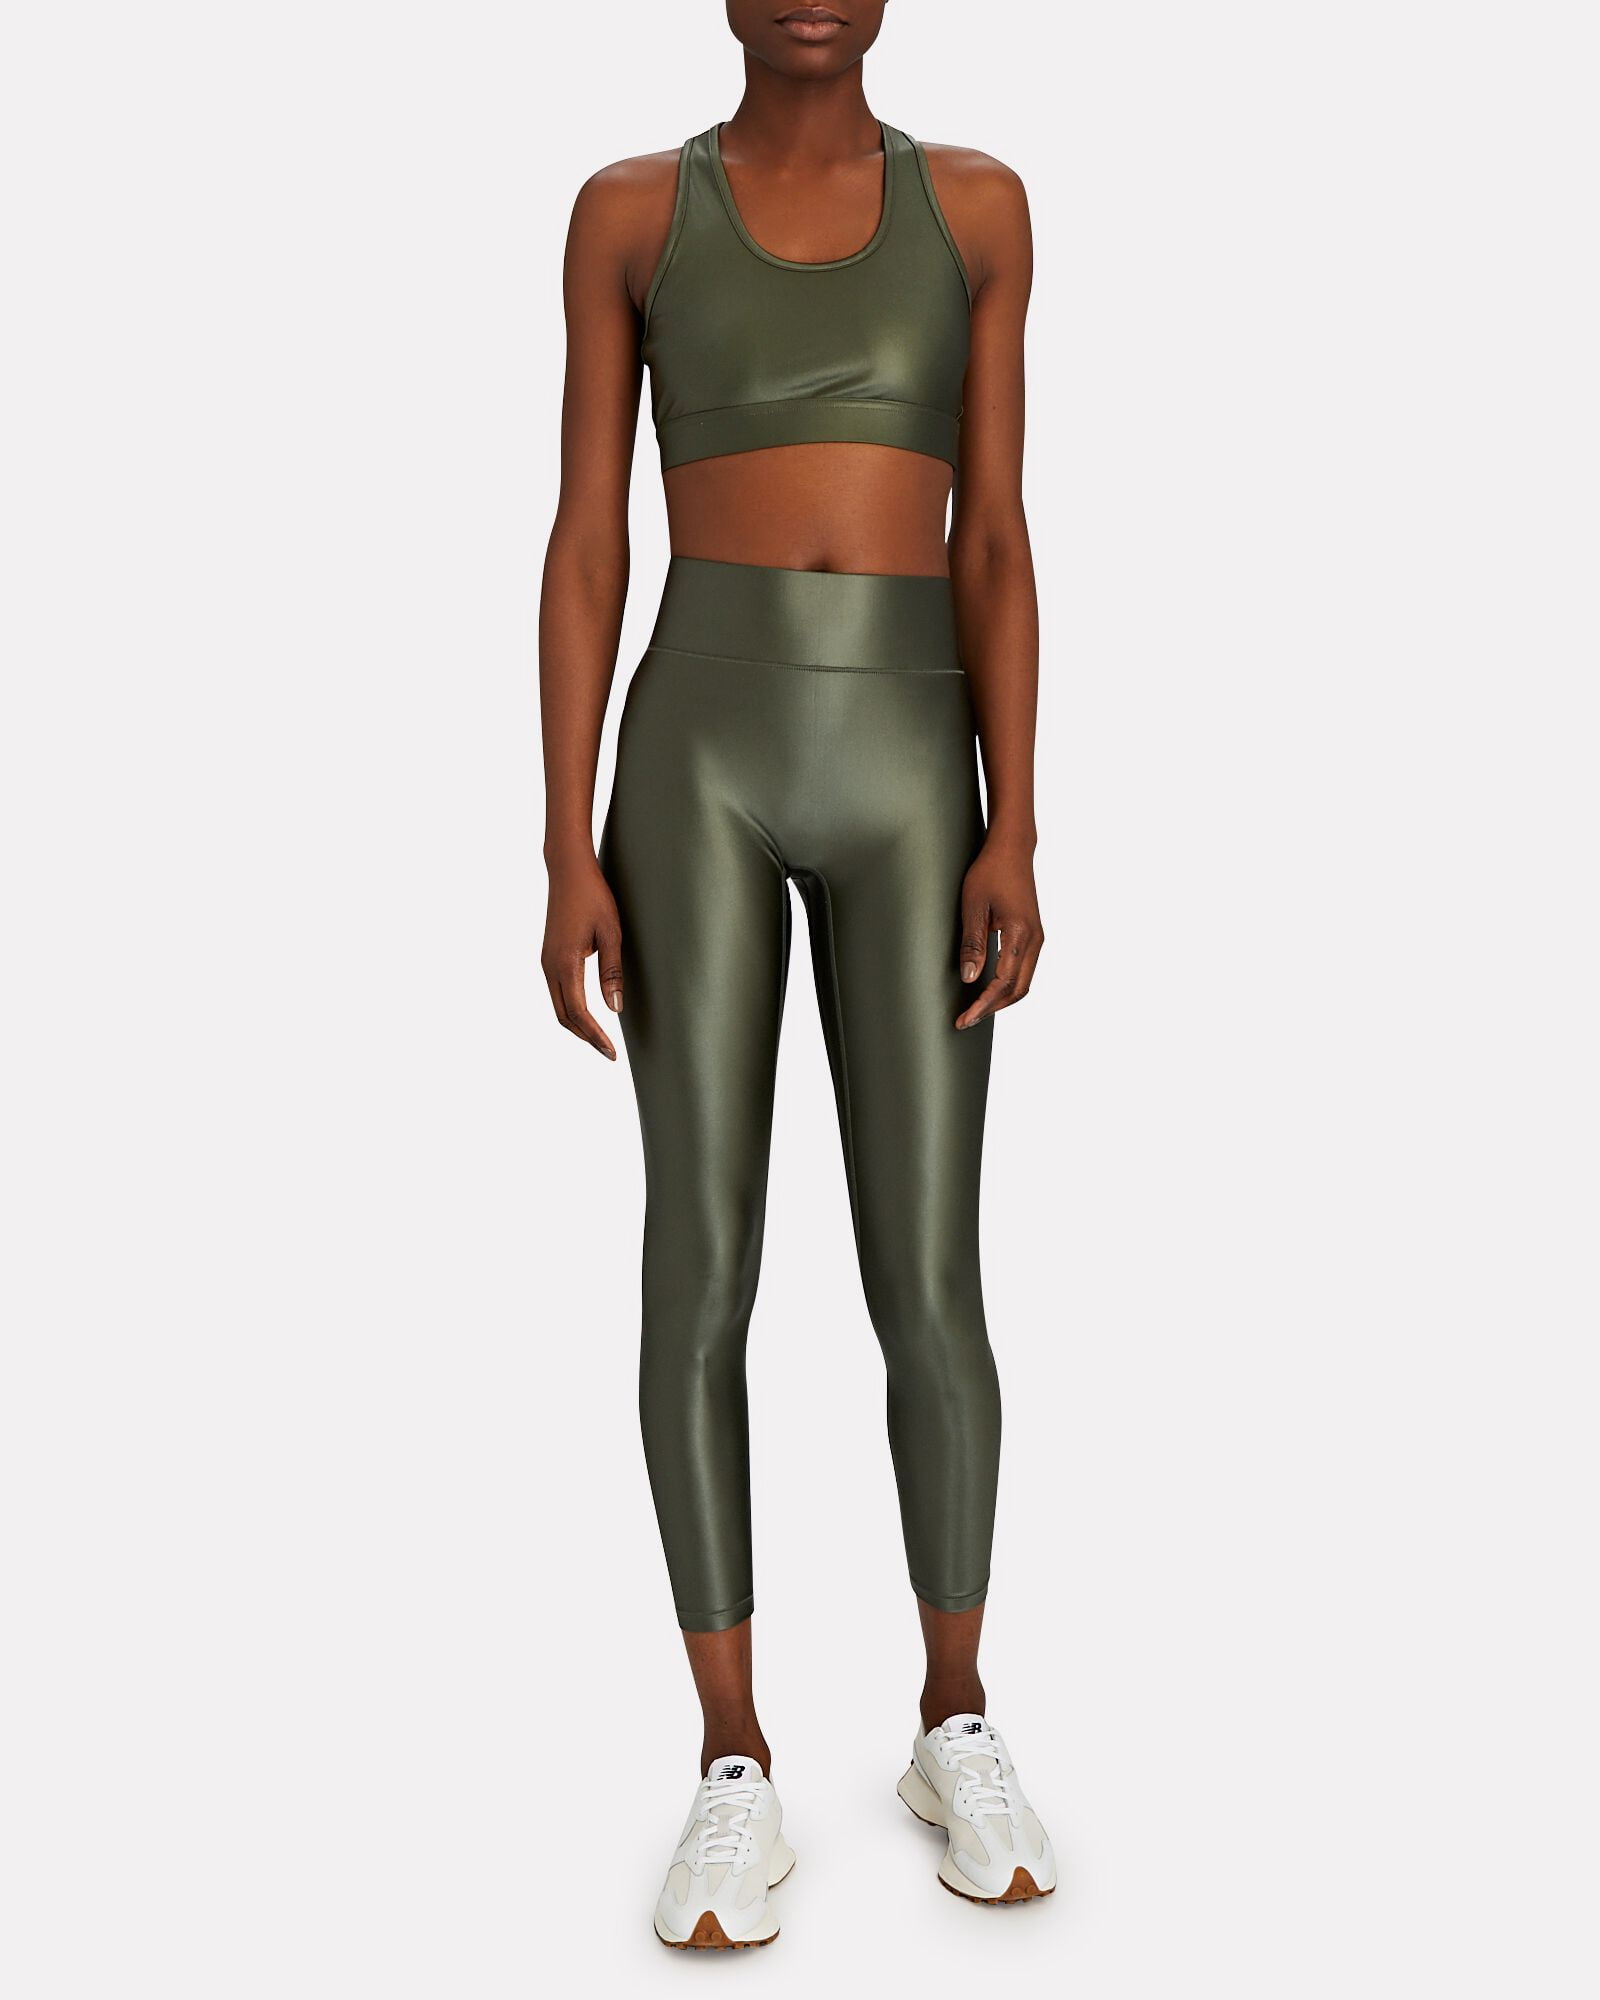 All Access Bandier OLIVE SHINE Women's Center Stage Legging 1X 